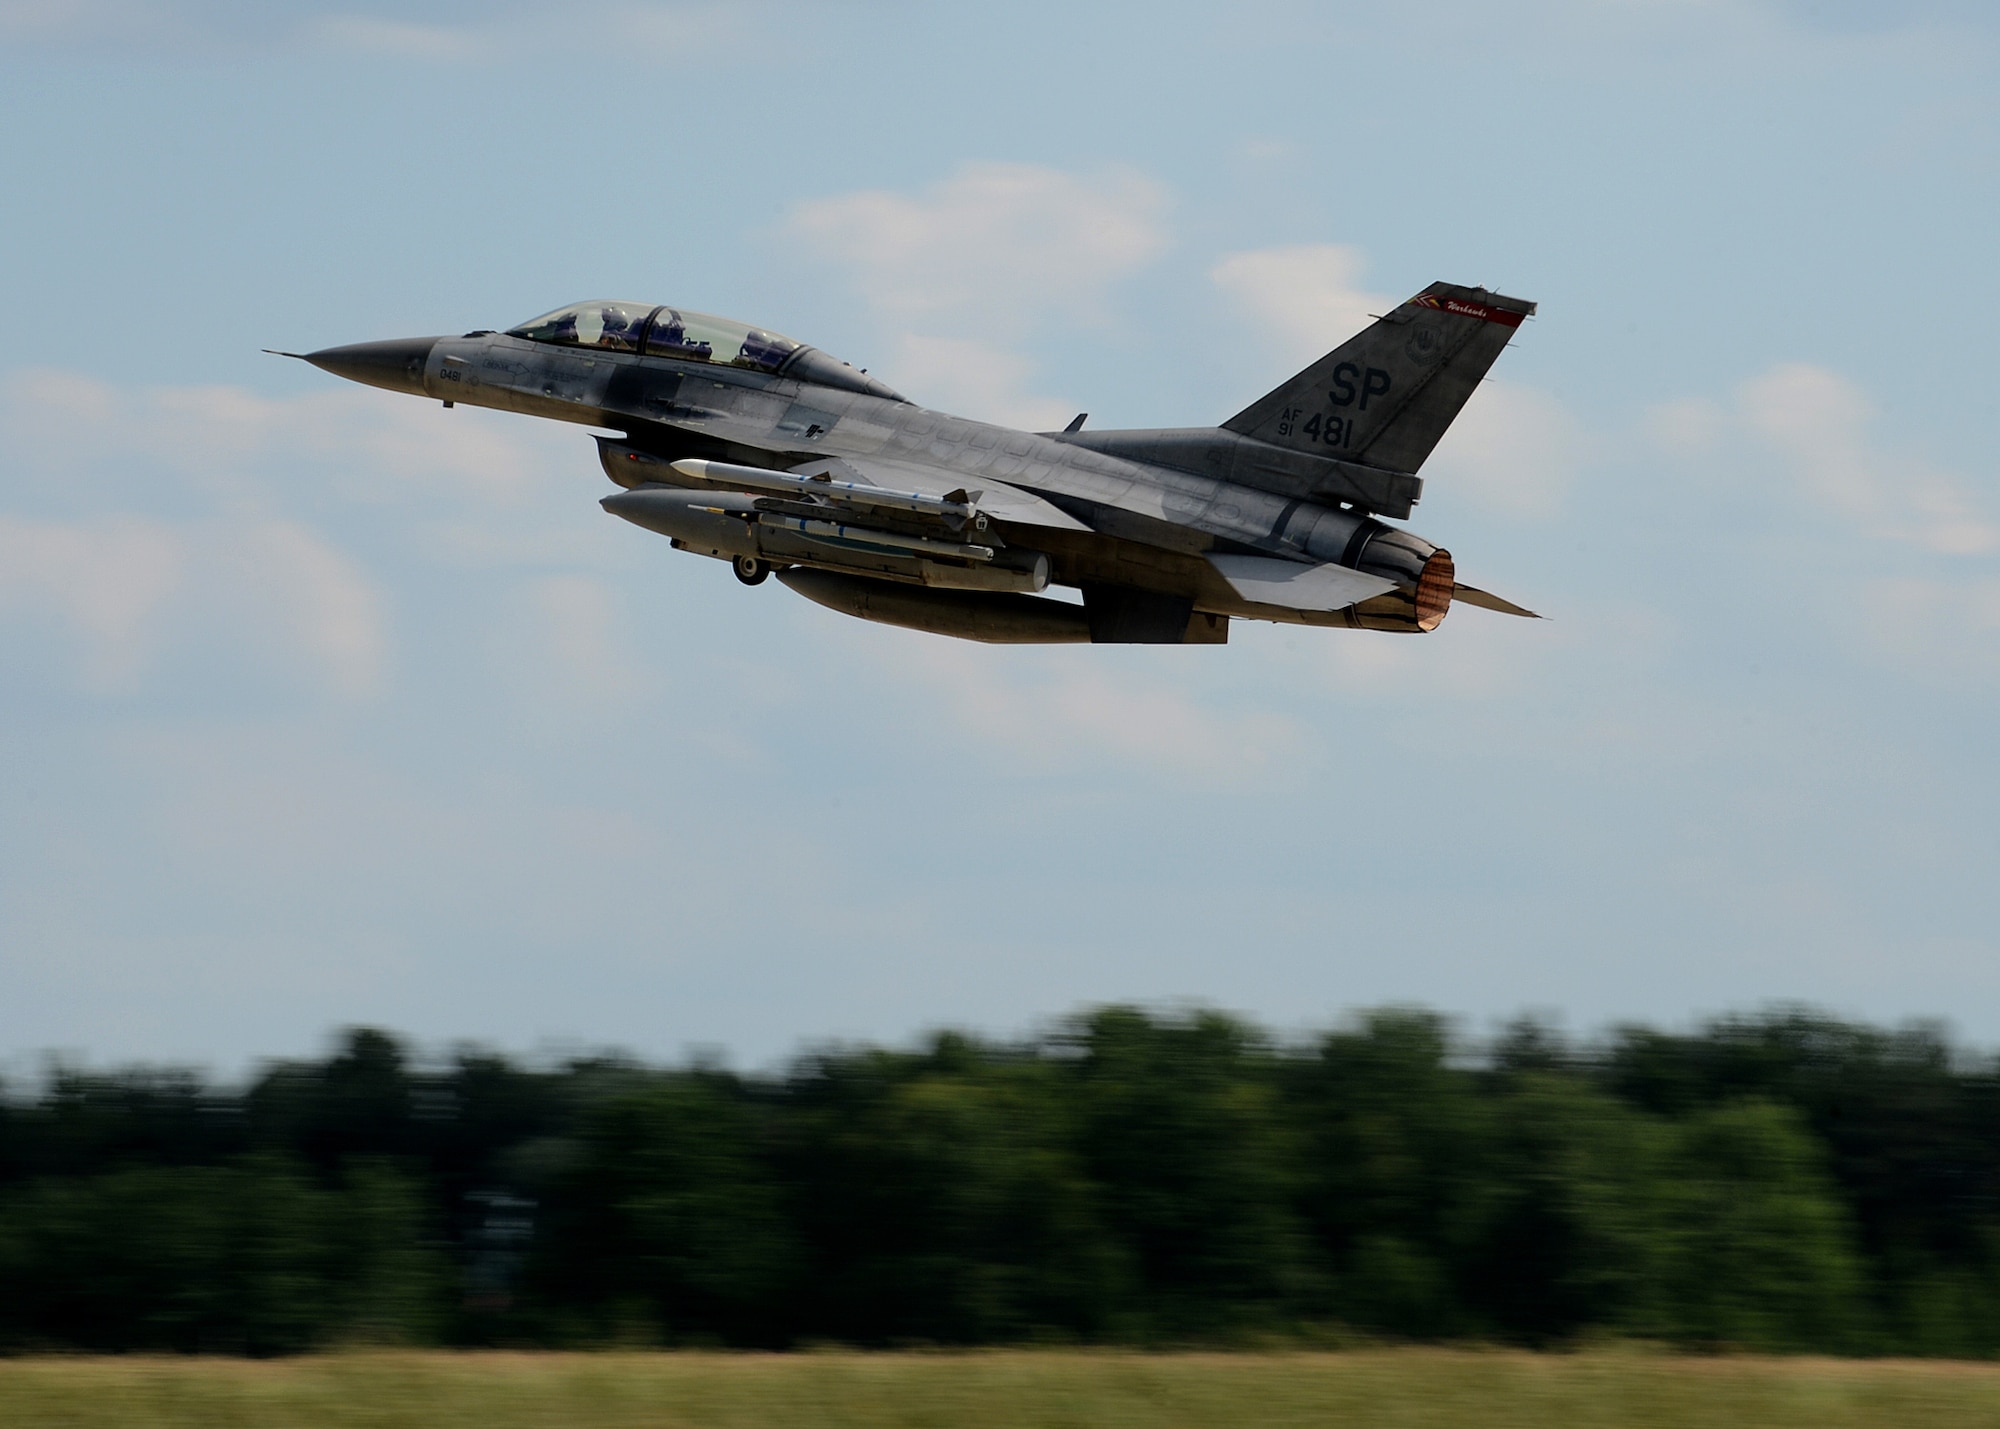 A U.S. Air Force F-16 Fighting Falcon fighter aircraft from the 52nd Fighter Wing, Spangdahlem Air Base, Germany, takes off from Lask Air Base, Poland, June 12, 2014. There are 18 aircraft participating in multinational Polish-led Exercise EAGLE TALON and U.S. Navy-led BALTOPS 14 in addition to U.S. Aviation Detachment Rotation 14-3. U.S. Air Force pilots flew with other pilots from multiple countries to increase readiness for real-world operations and enhance interoperability between NATO forces. (U.S. Air Force photo by Airman 1st Class Kyle Gese/Released)